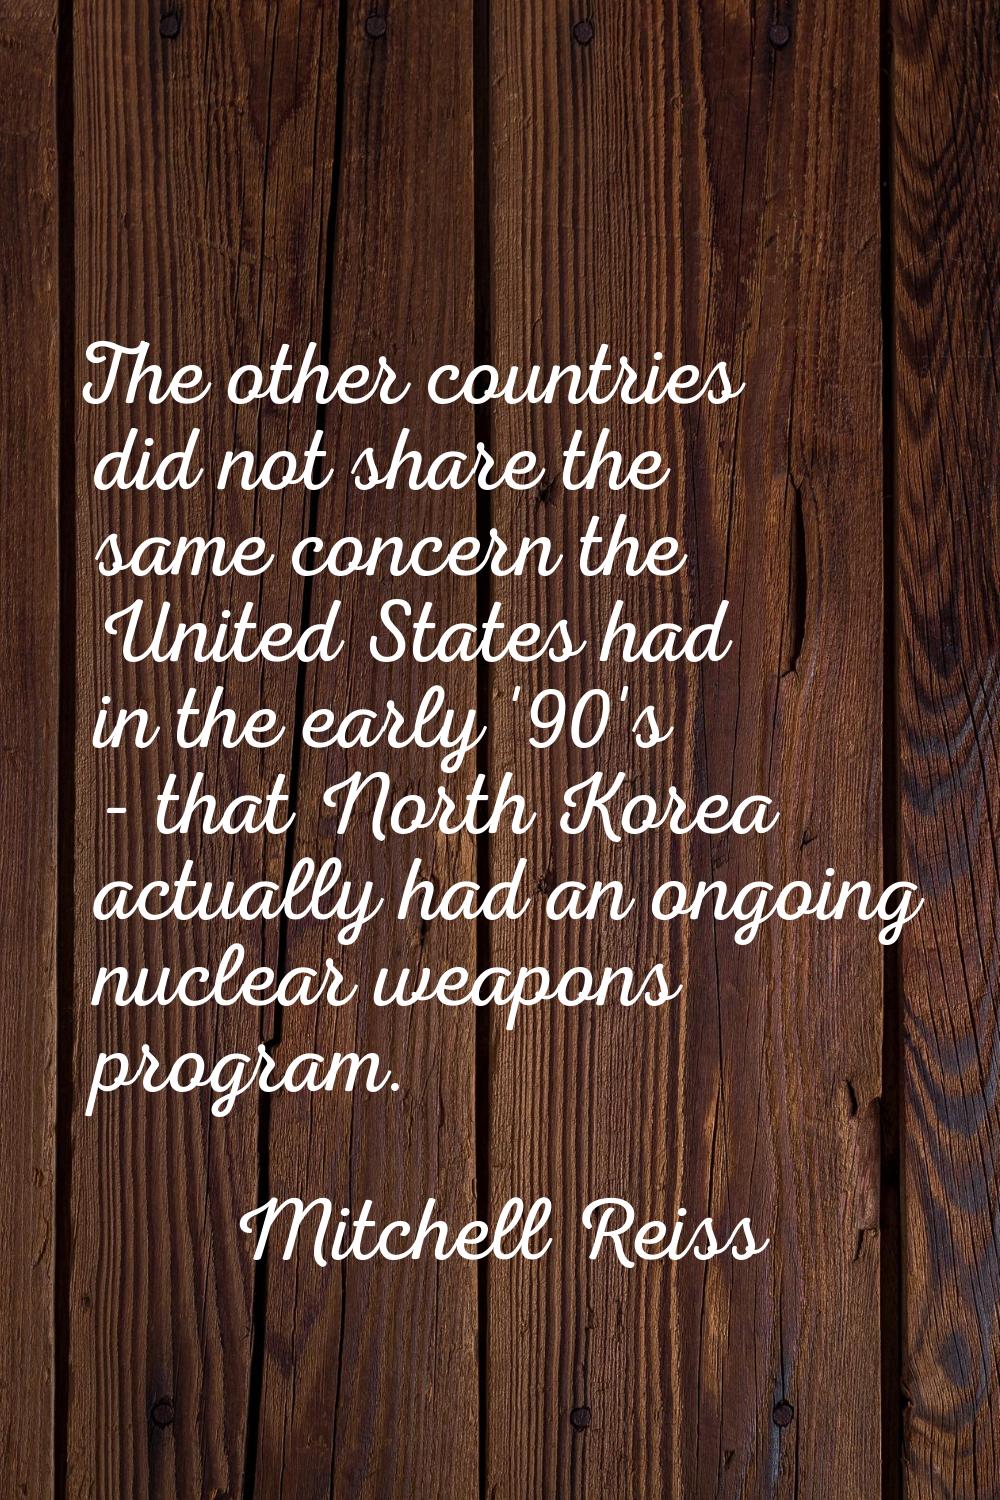 The other countries did not share the same concern the United States had in the early '90's - that 